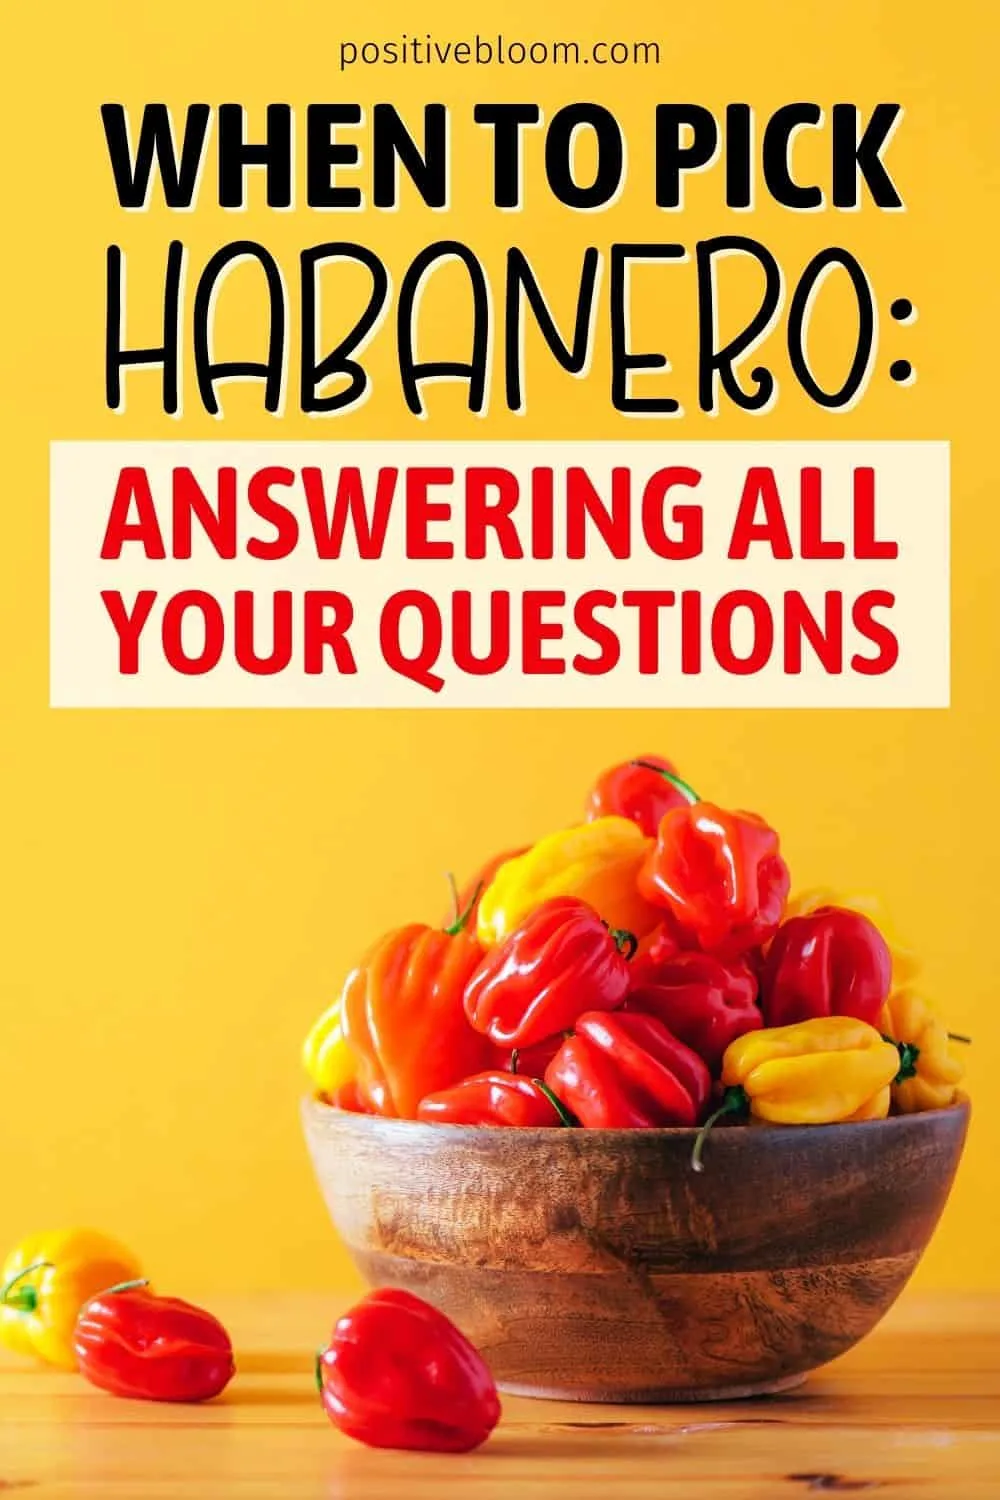 When To Pick Habanero Answering All Your Questions